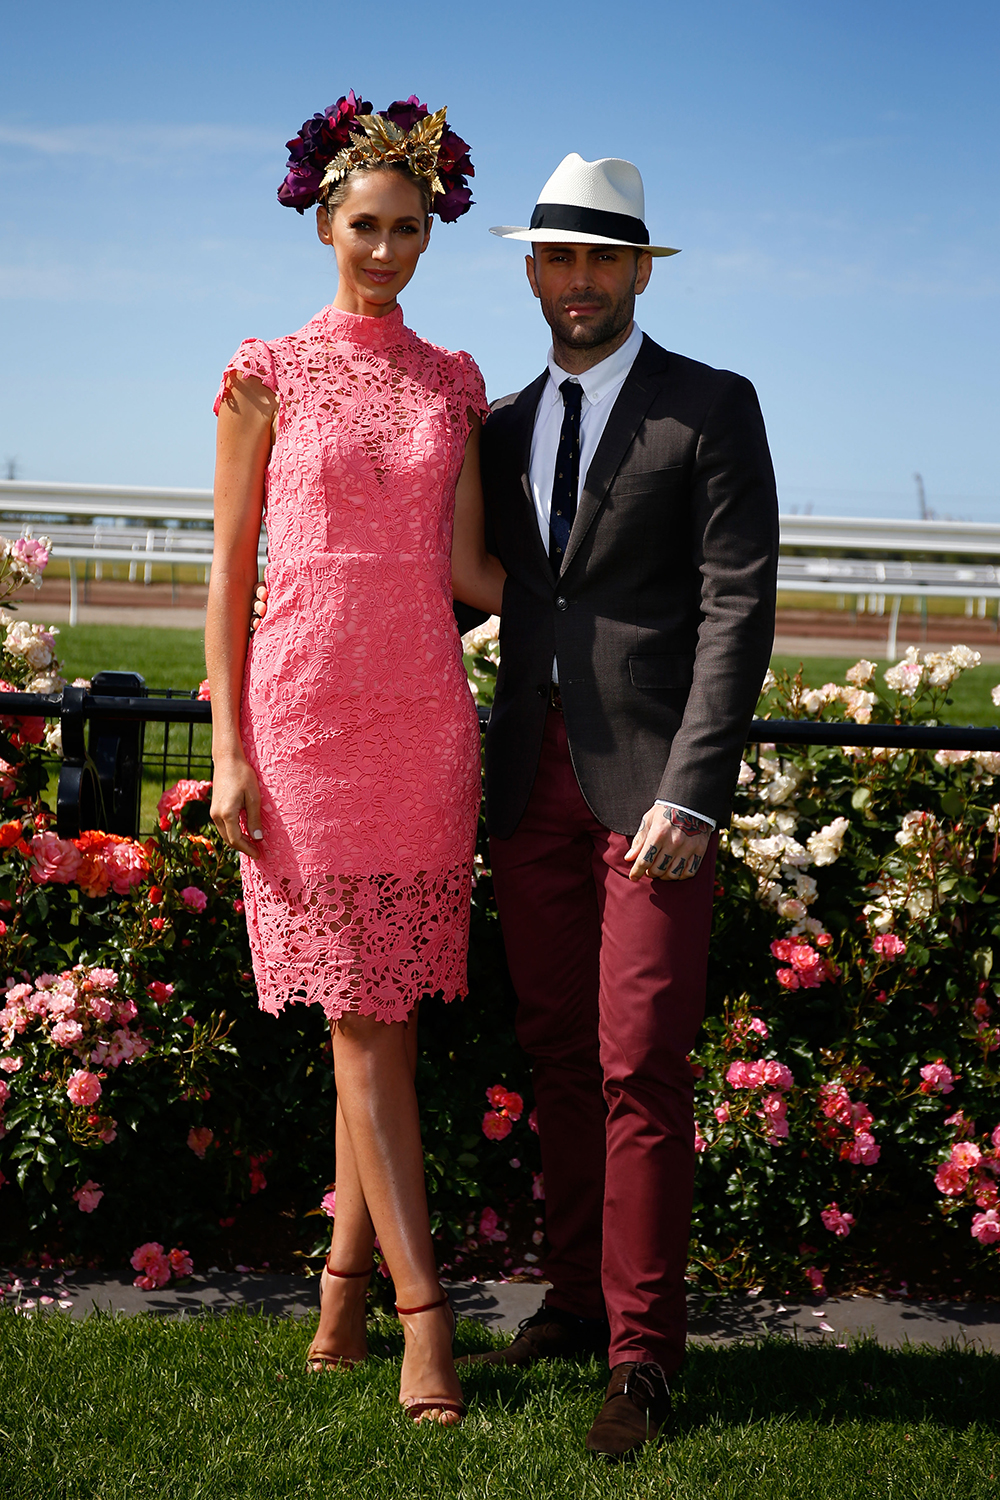 Nikki Phillips at the Melbourne Cup, 2015